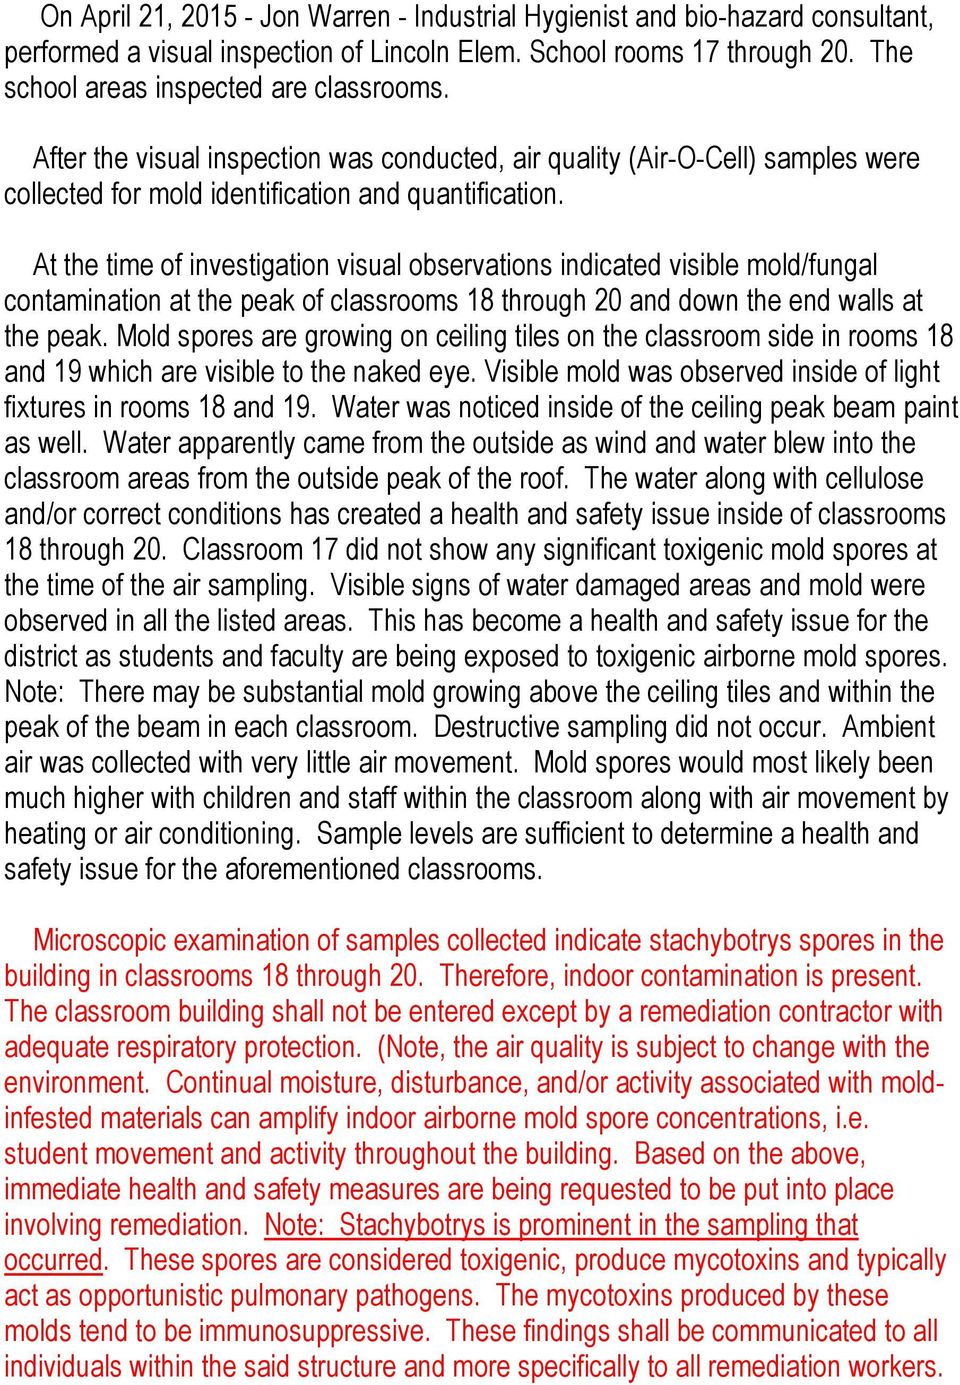 At the time of investigation visual observations indicated visible mold/fungal contamination at the peak of classrooms 18 through 20 and down the end walls at the peak.